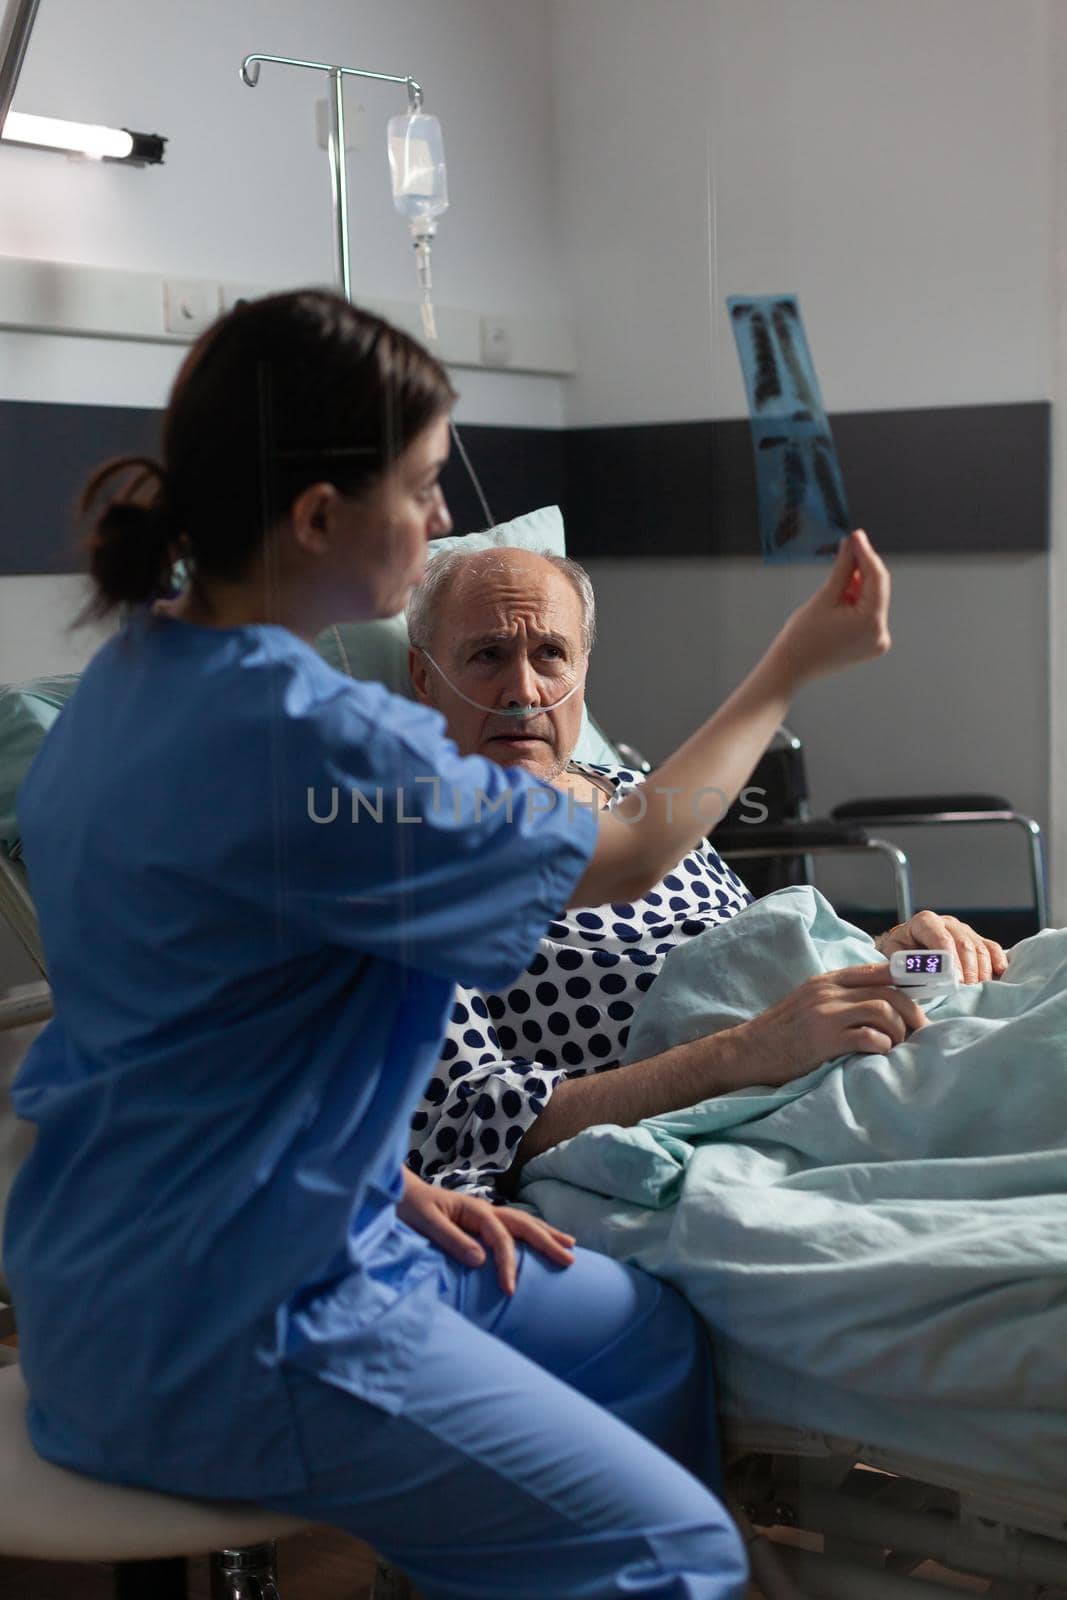 Old patient with lungs illness breathing using oxygen mask laying in hospital bed, listening nurse showing x-ray explayning diagnosis before surgery.